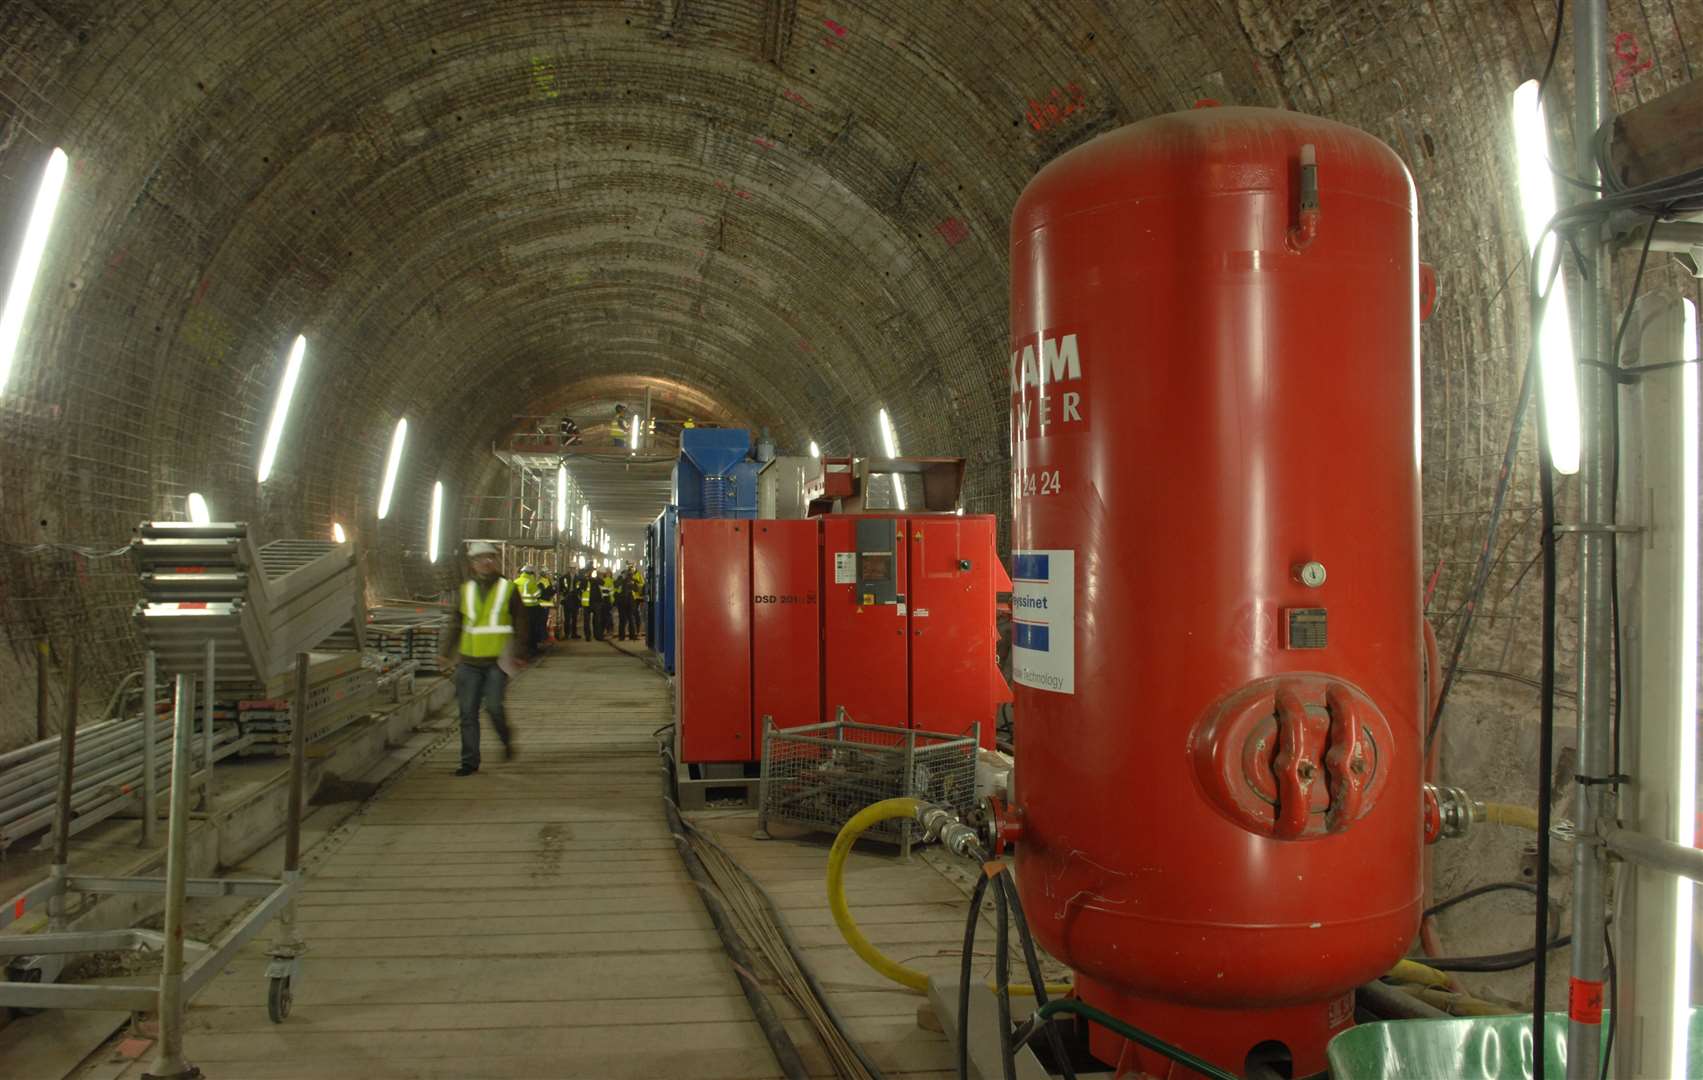 Repair work being carried out on the Channel Tunnel after a fire in 2008